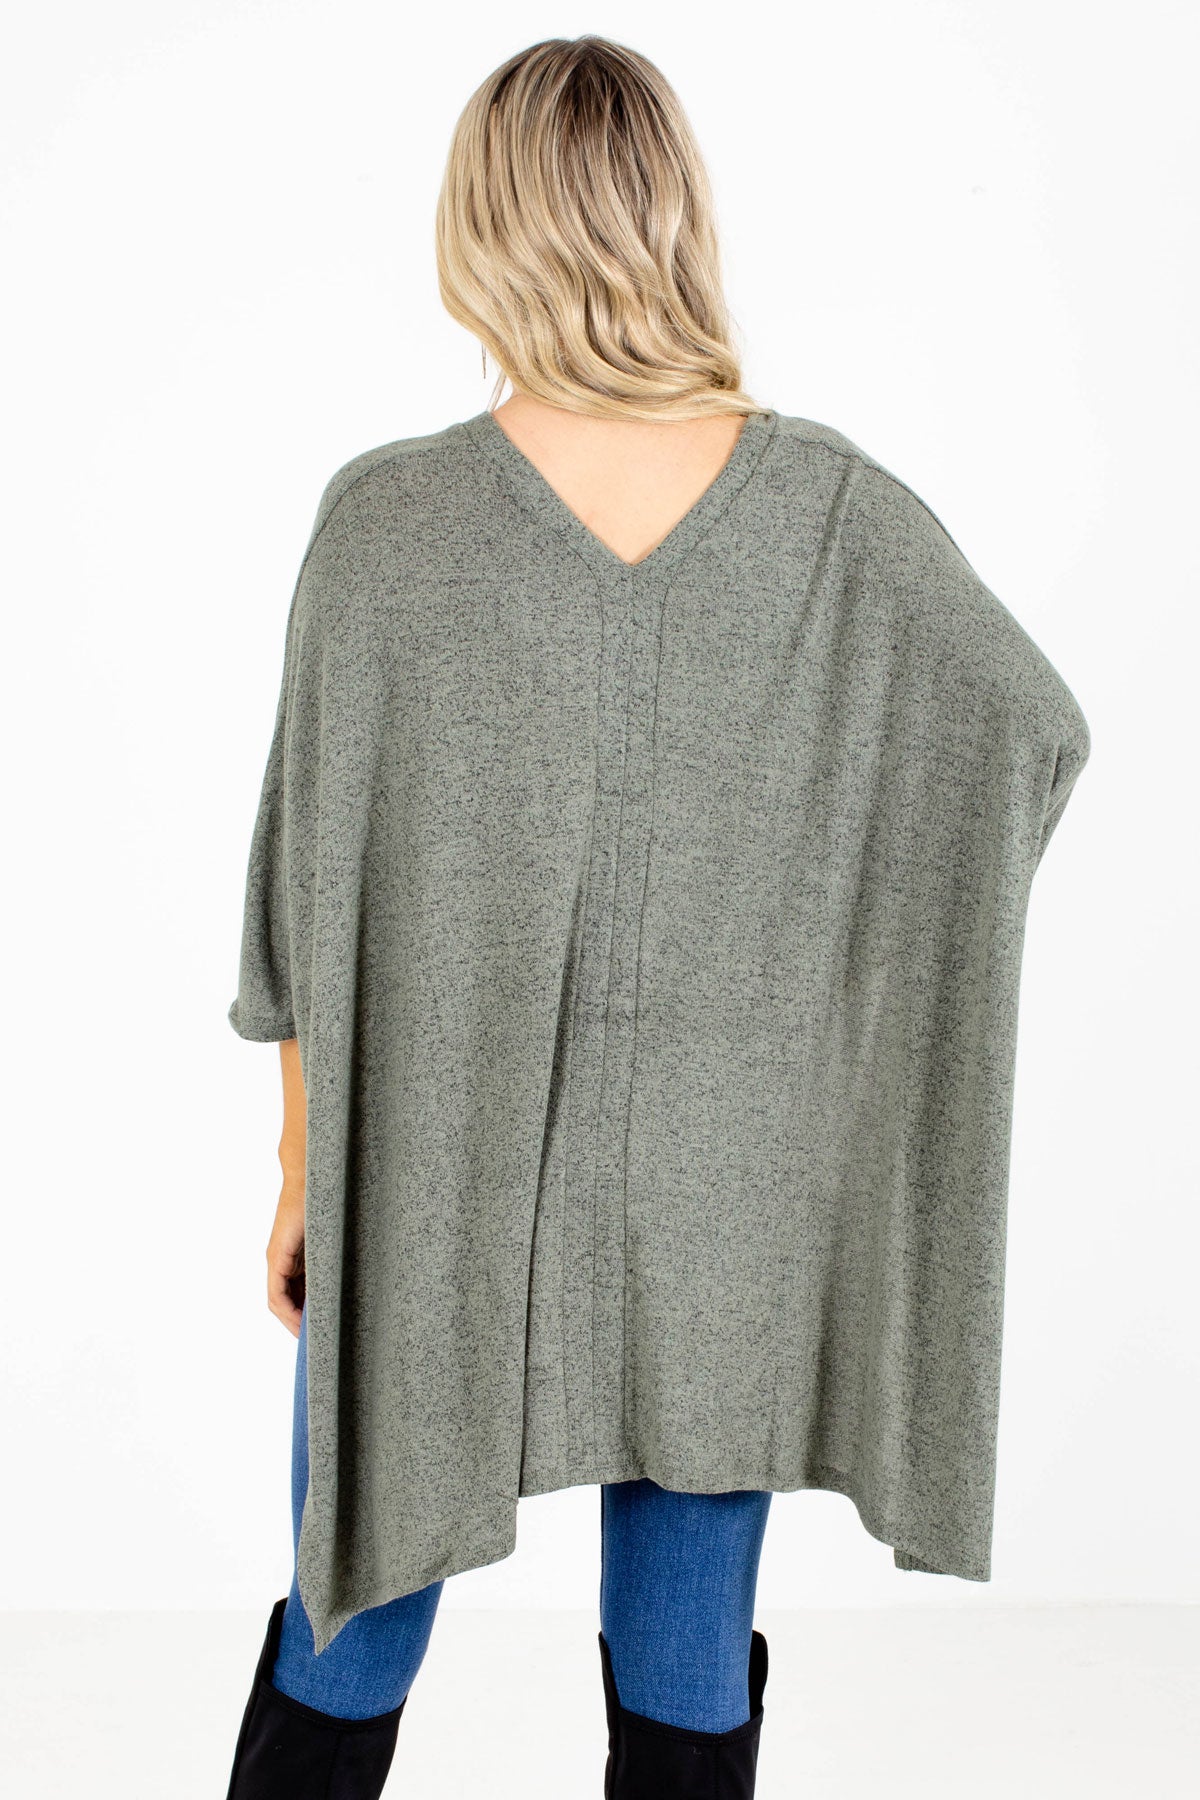 Boutique Light Sage Oversized Poncho Top for Women